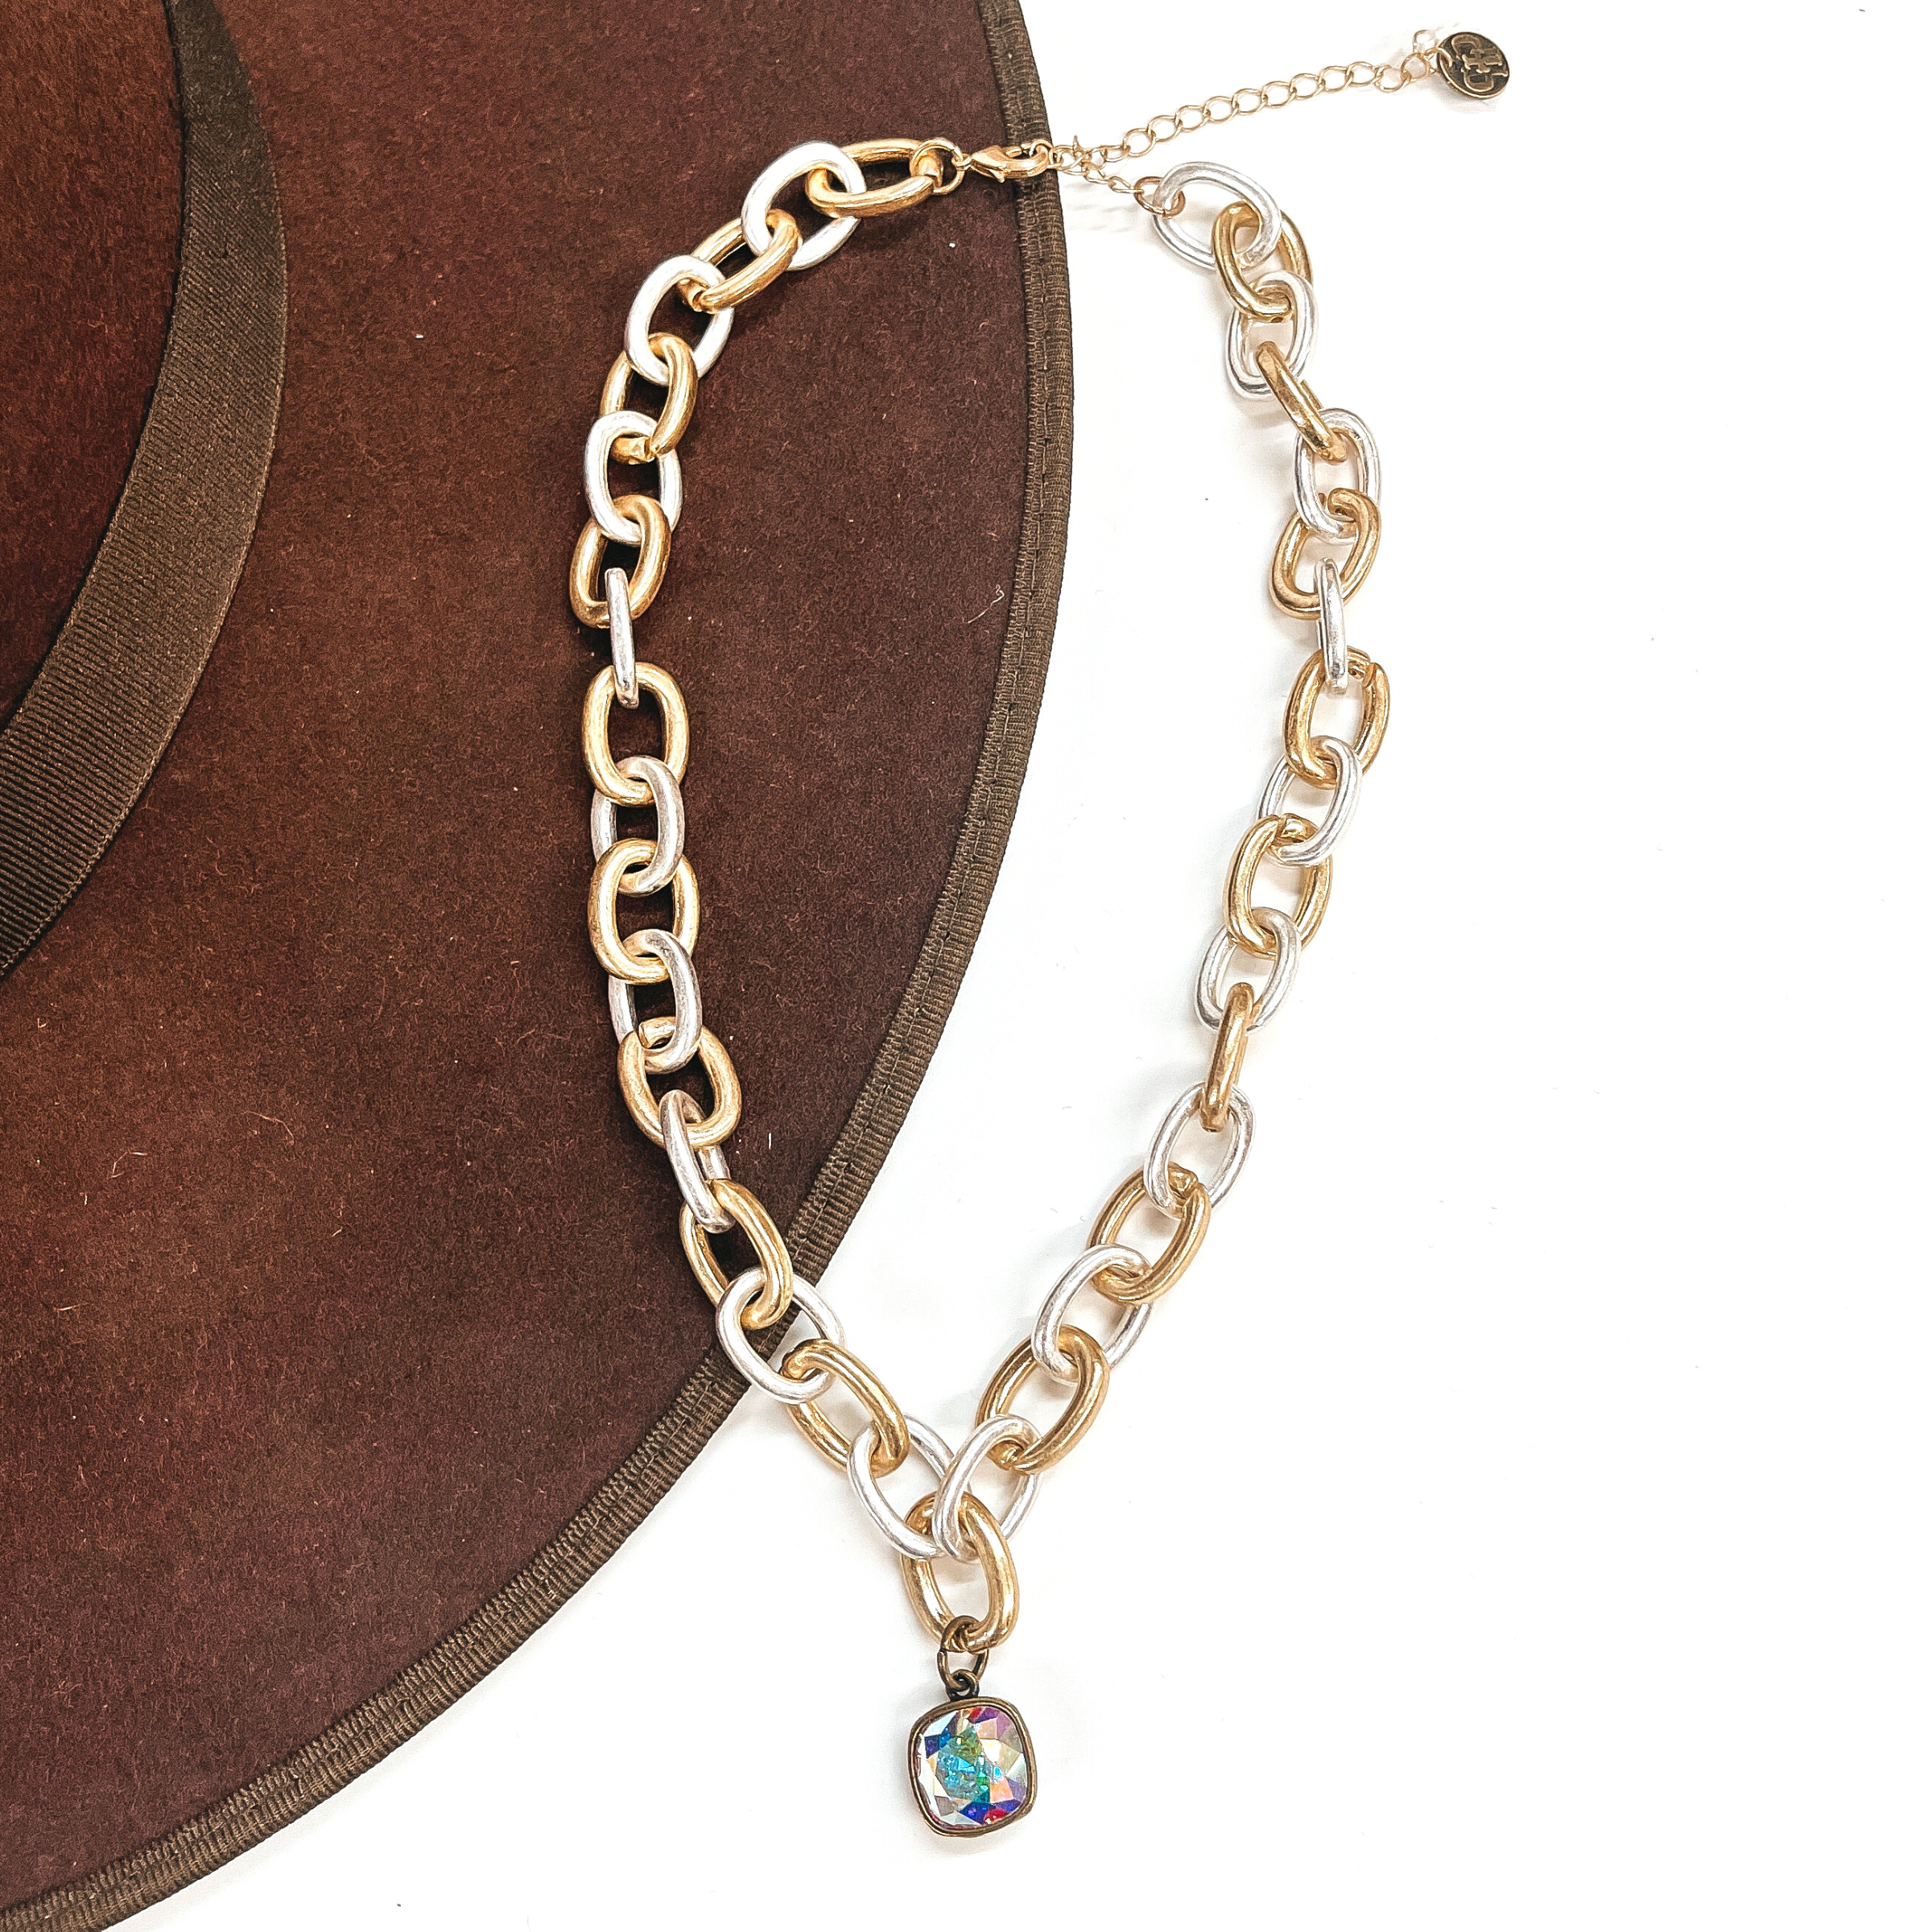 This is silver and gold tone thick linked chain necklace with an AB cushion cut crystal  charm in a bronze setting. This necklace is taken laying on a dark brown hat brim  and on a white background.